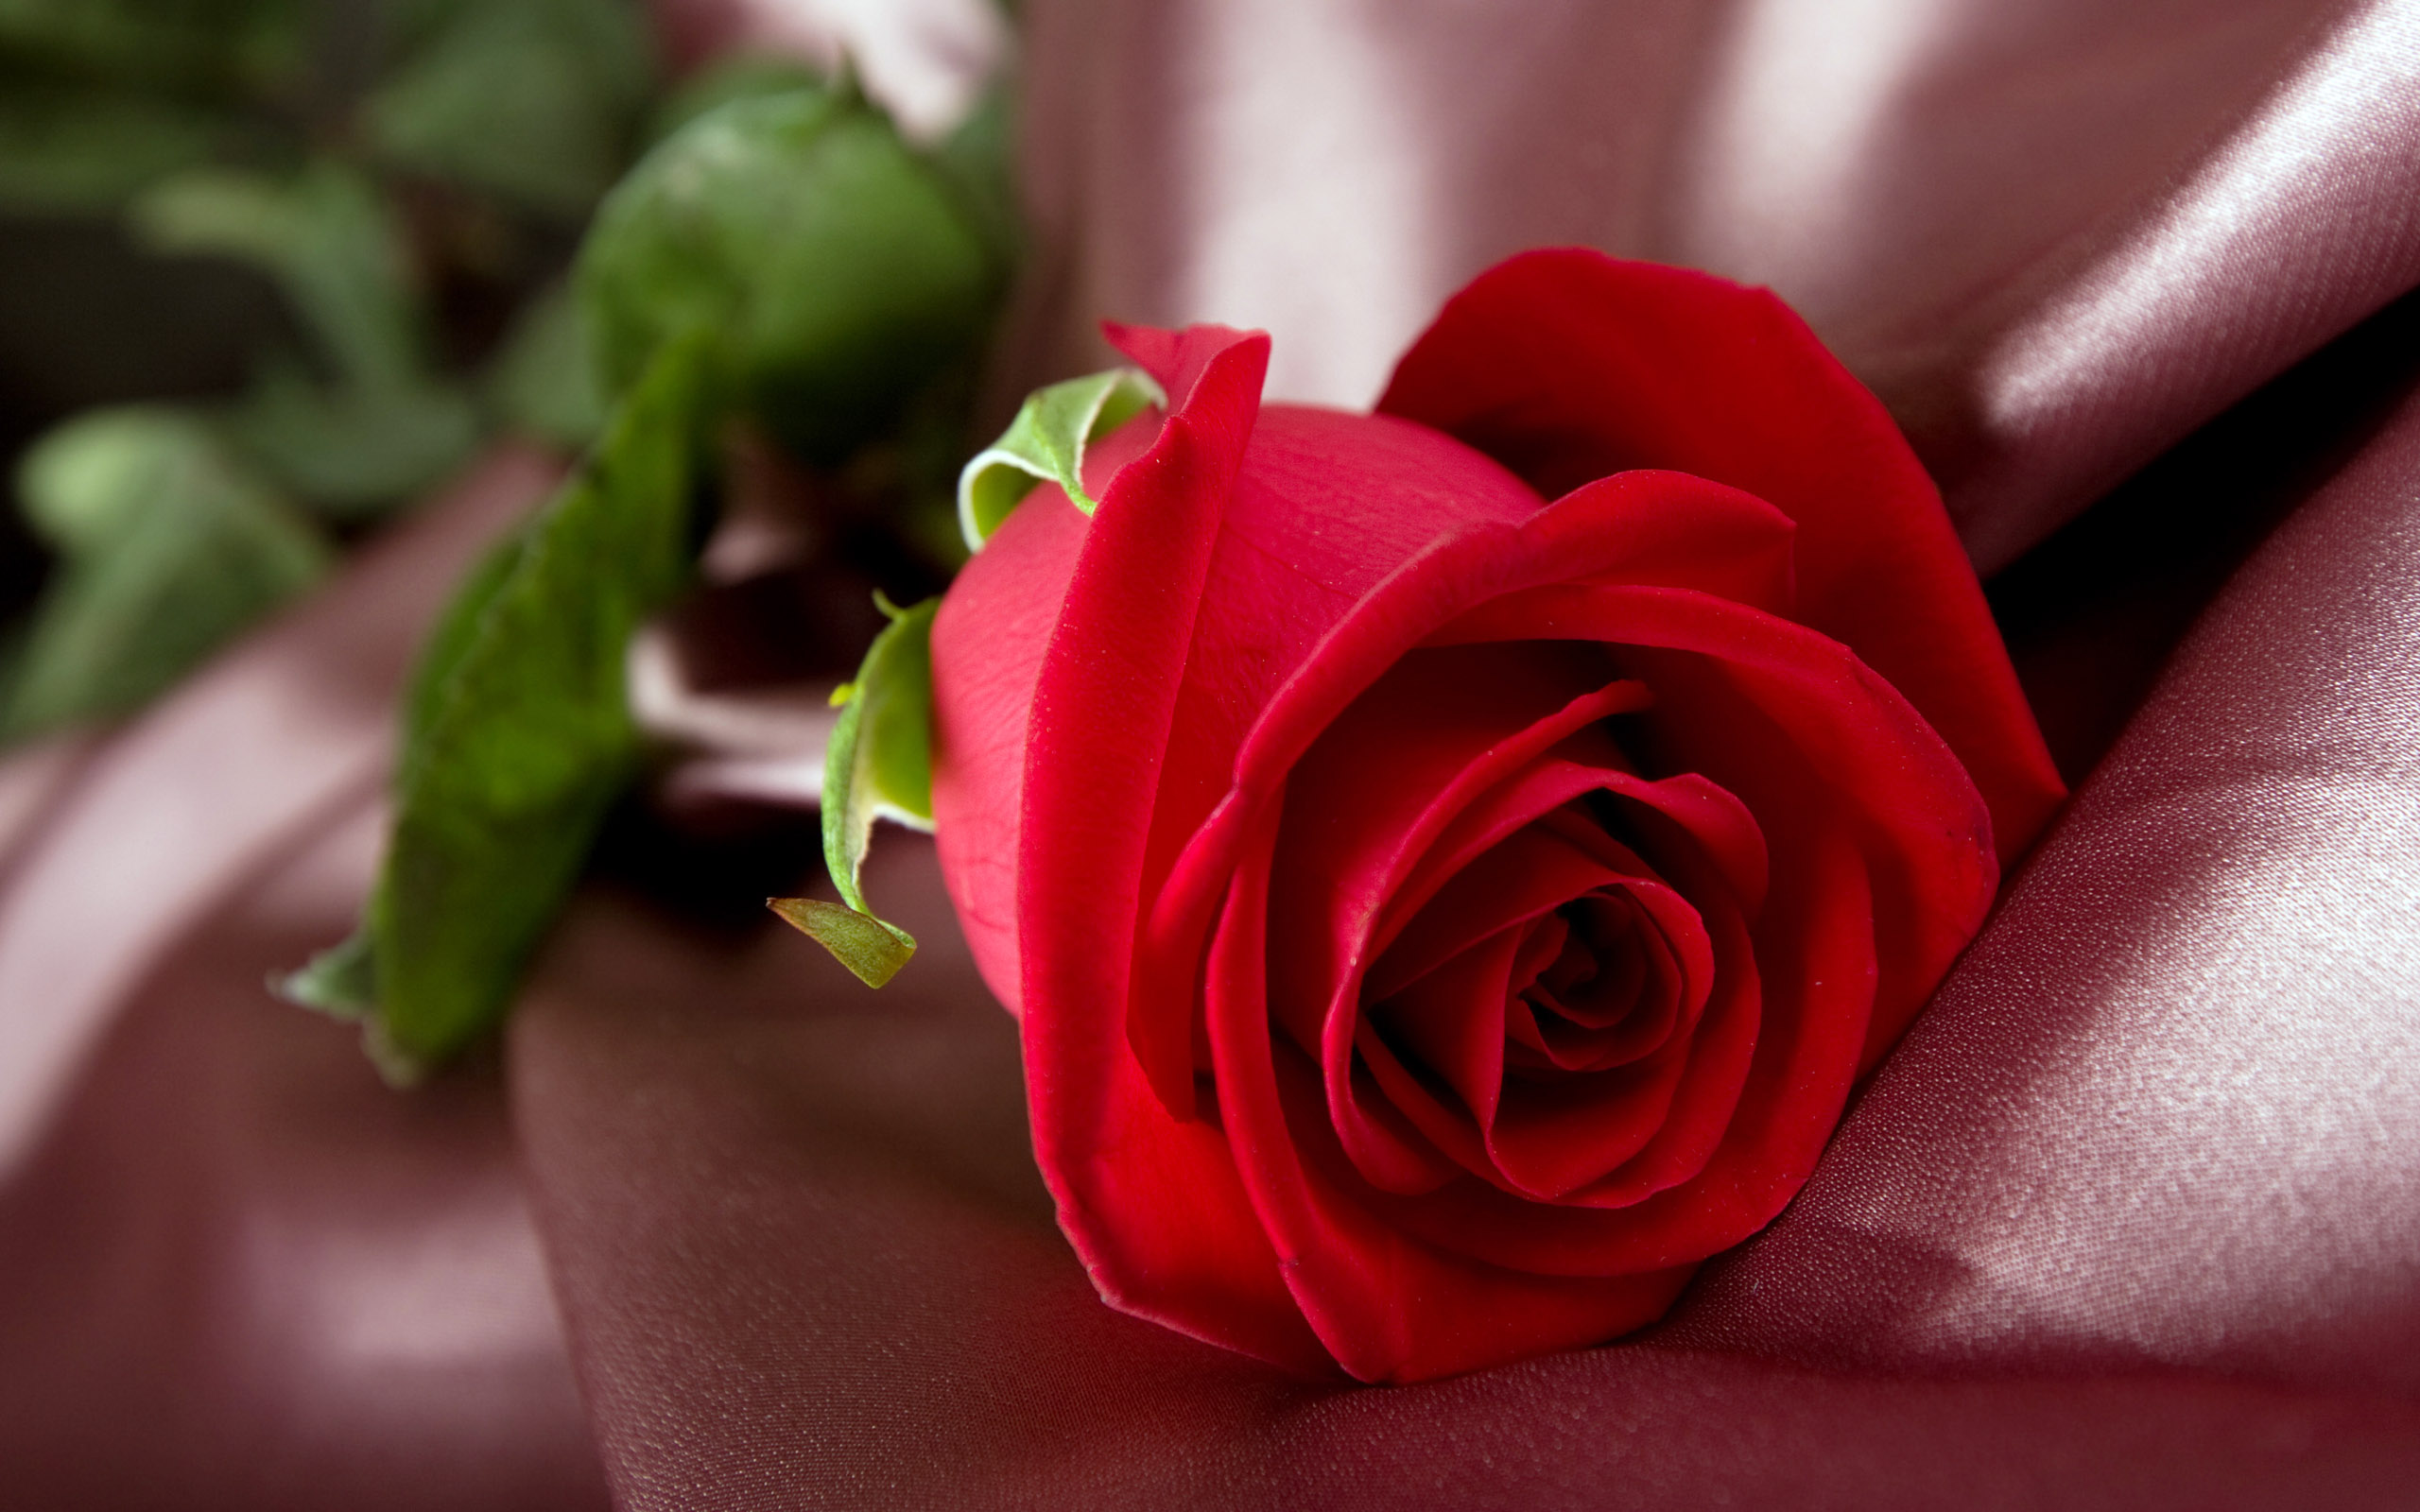 Desktop Wallpapers Flowers Backgrounds Red Rose Super Hd Mco